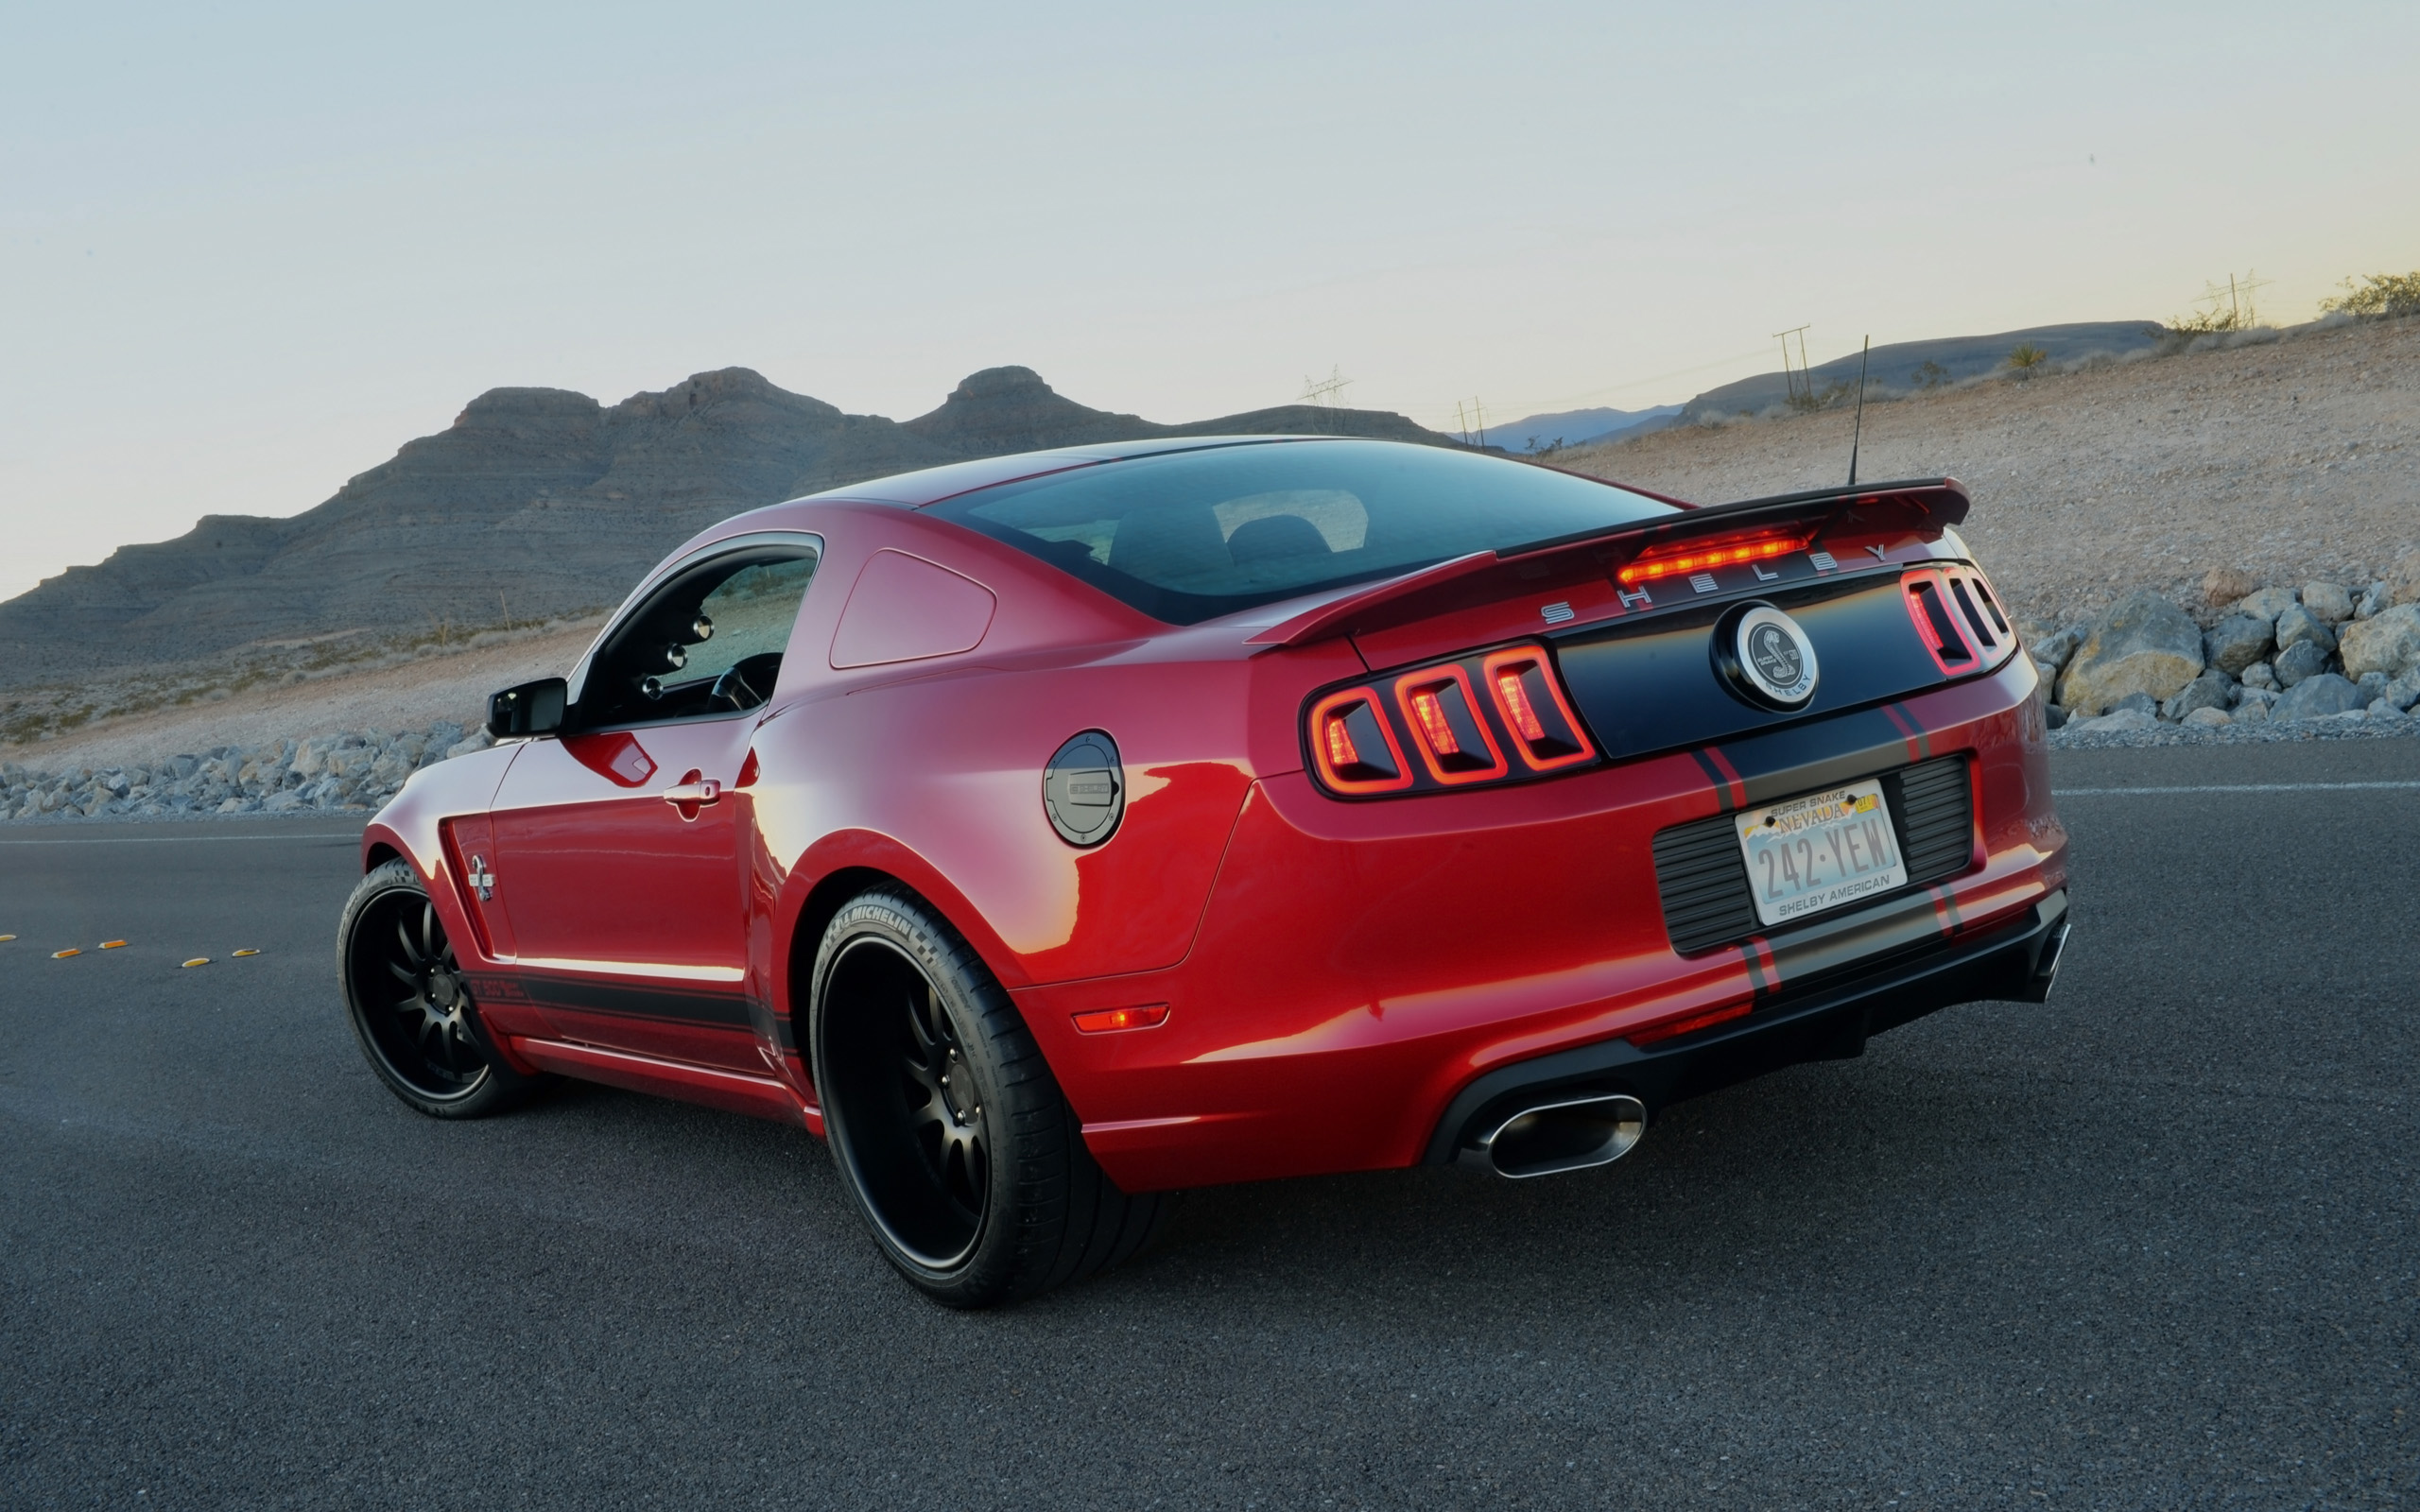 2013, Shelby, Gt500, Super, Snake, Muscle, Supercar, Ford, Mustang Wallpaper